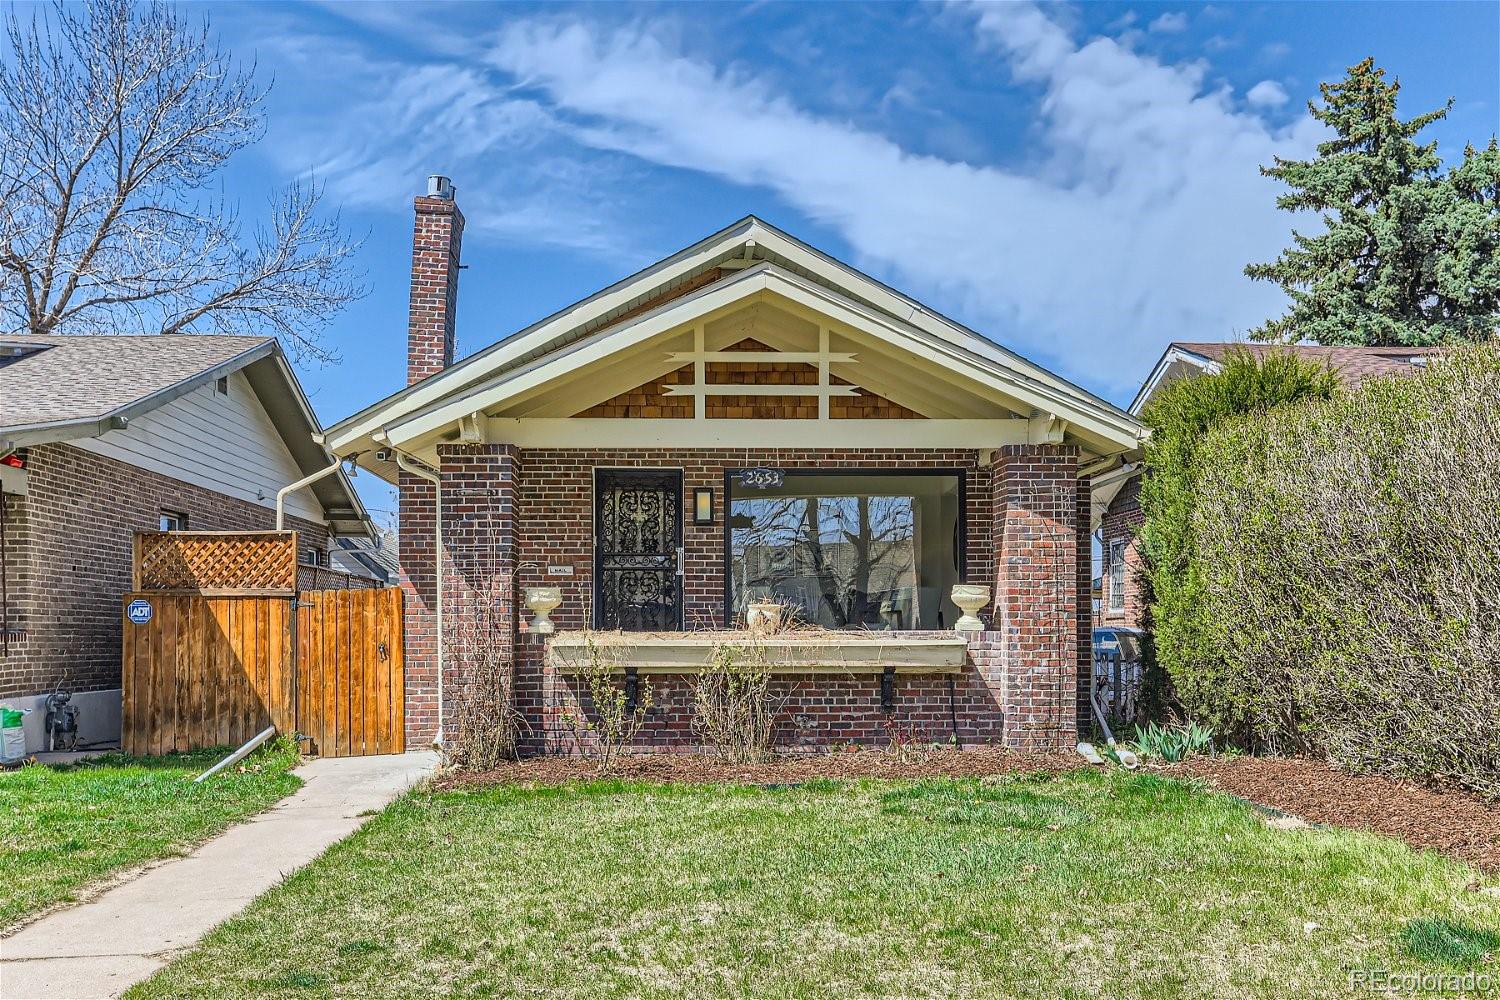 2653 n clayton street, denver sold home. Closed on 2024-05-10 for $801,000.